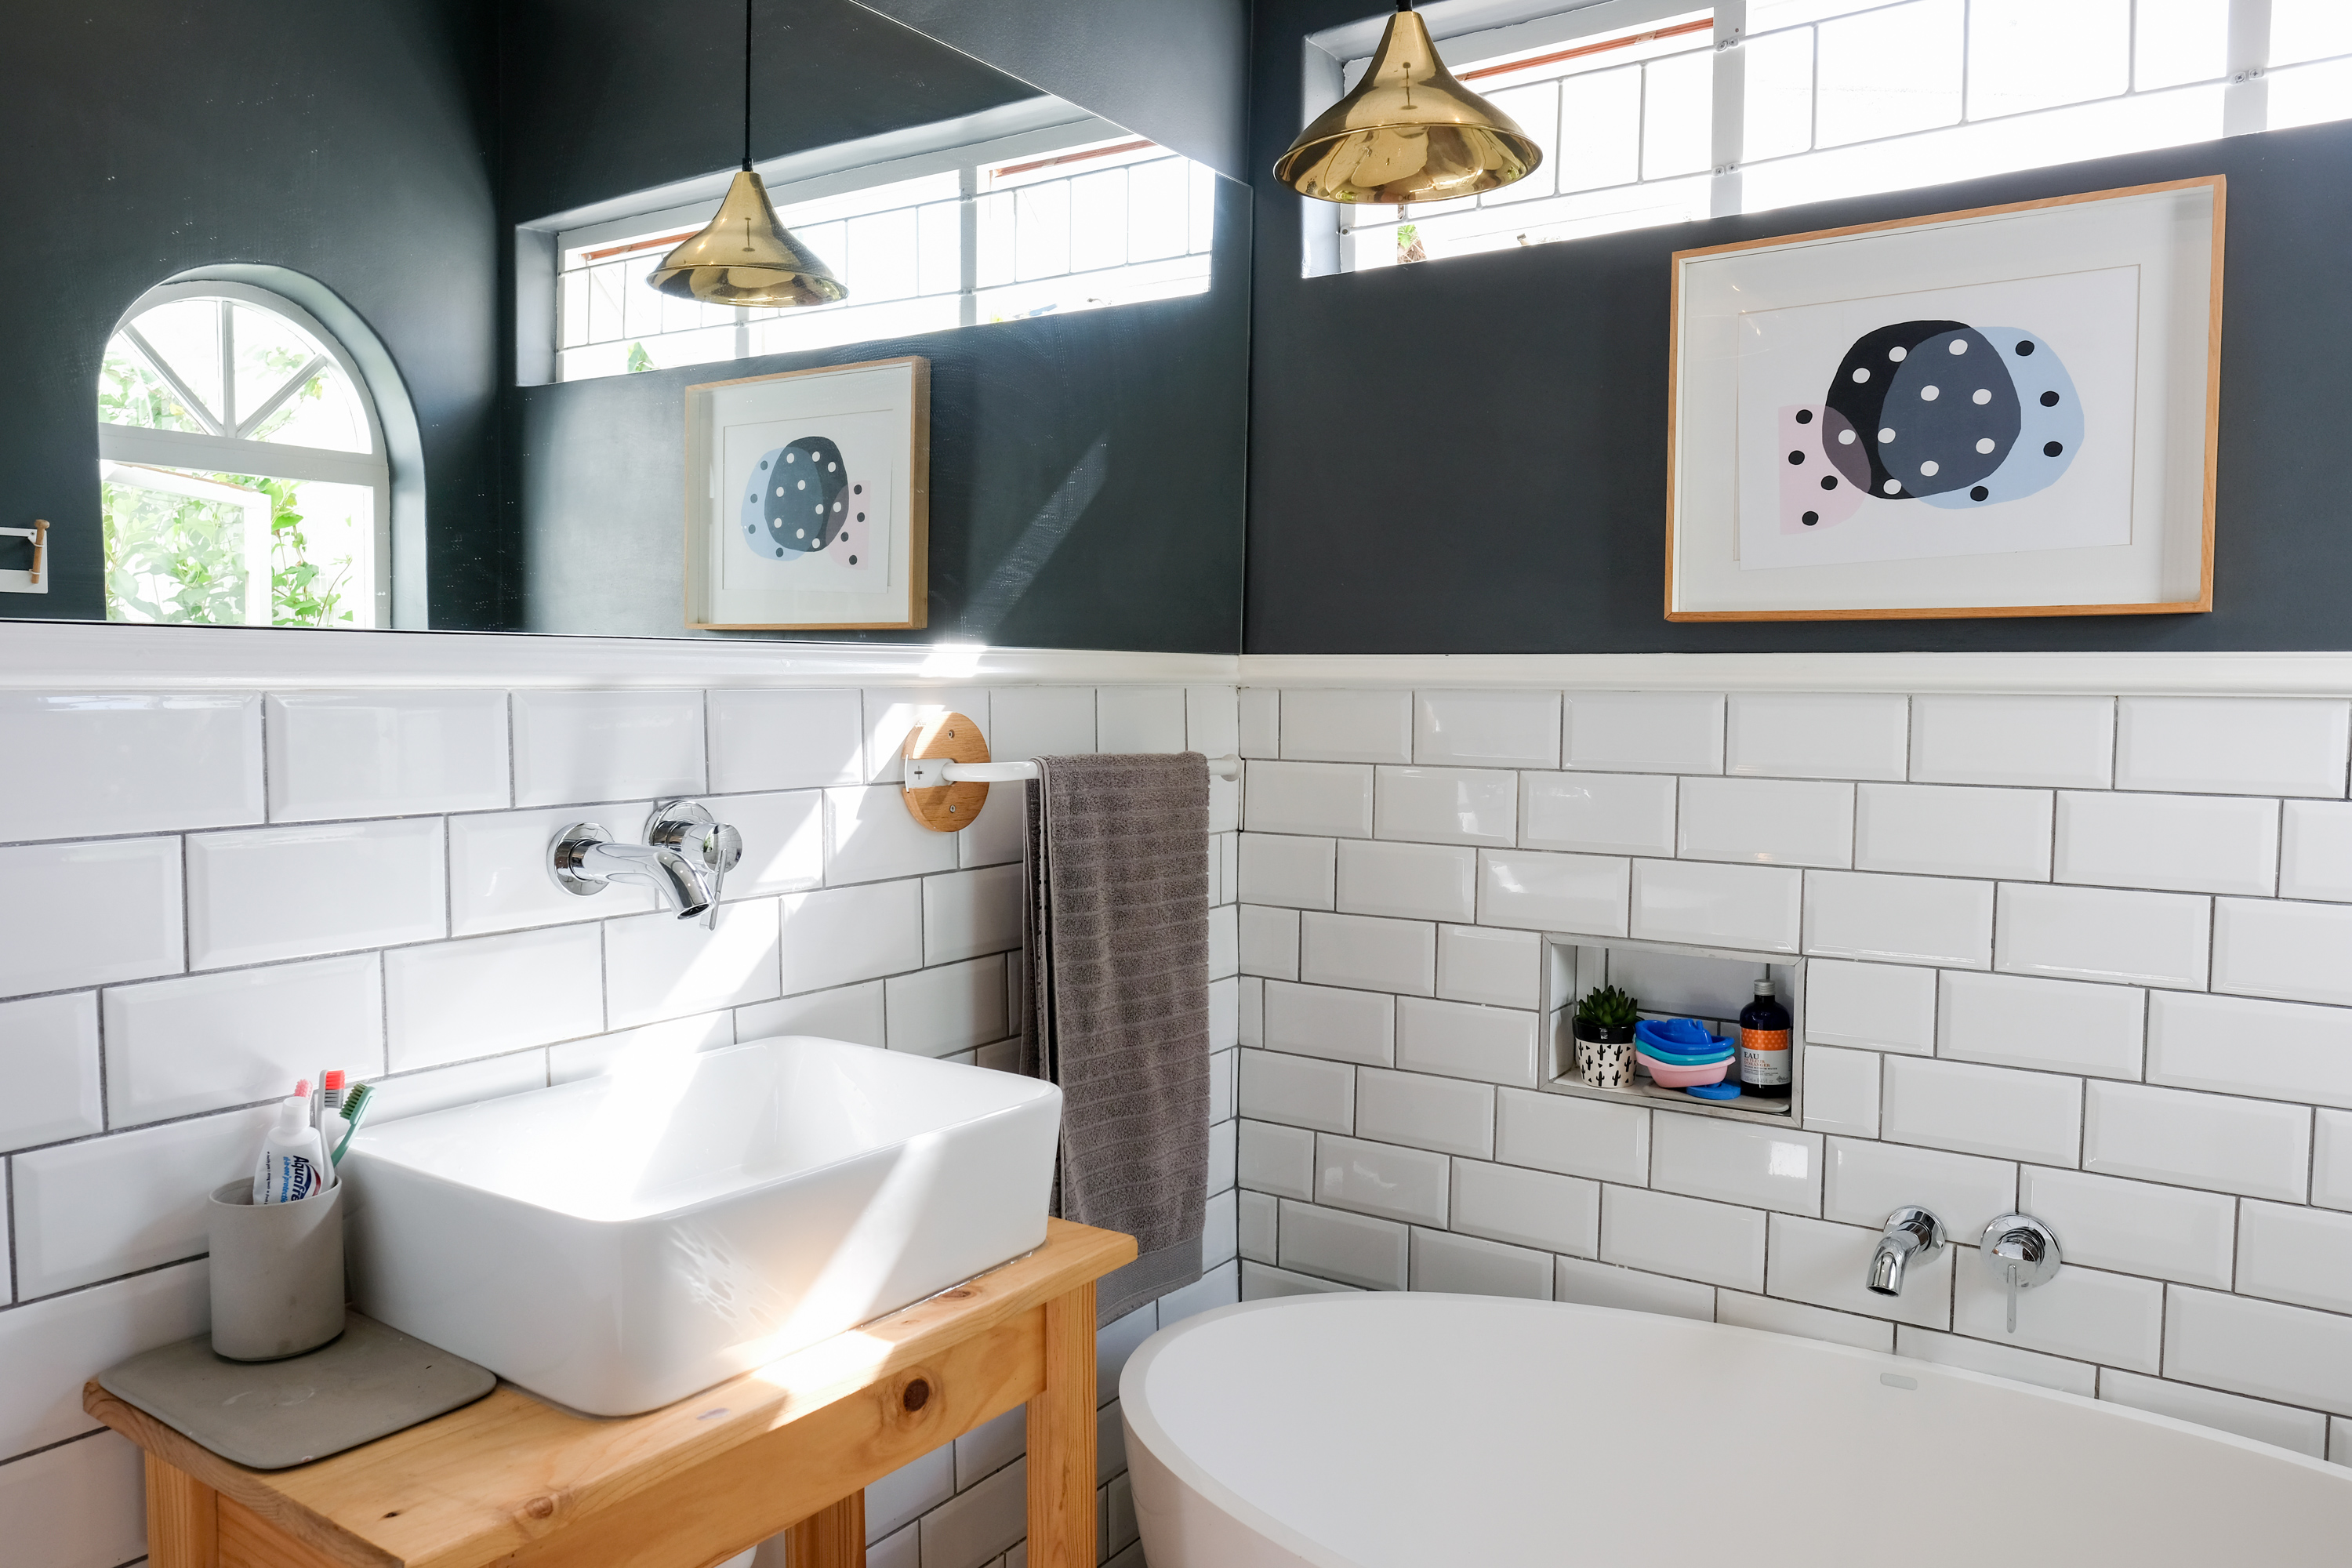 5 Things to Arrange a Small Bathroom To Make It More Attractive